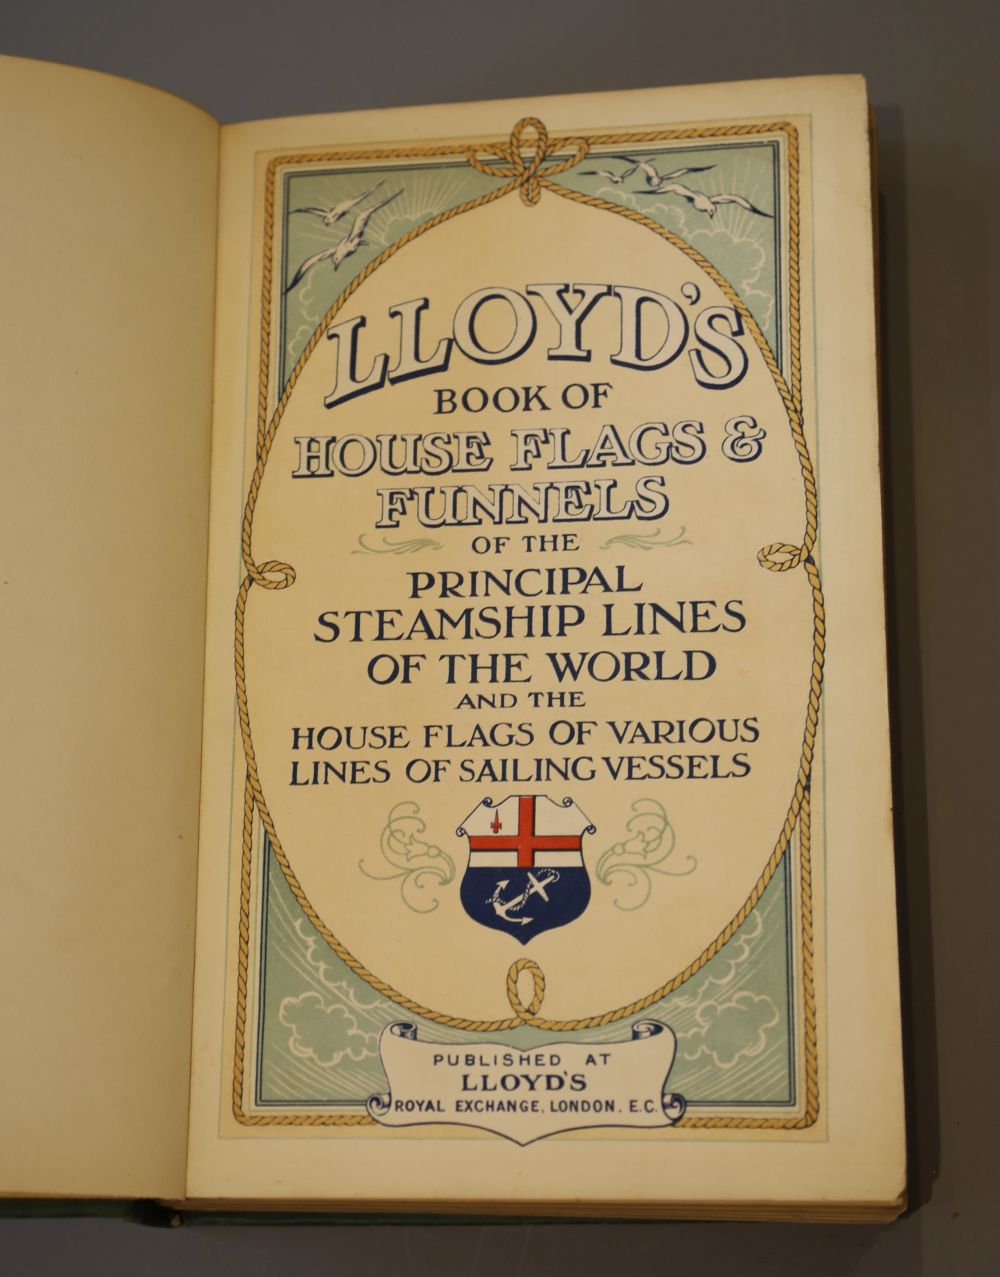 Lloyds - Lloyds Book of House Flags and Funnels of all the Principal Steamship Lines of the World, 8vo, with original title page, 111